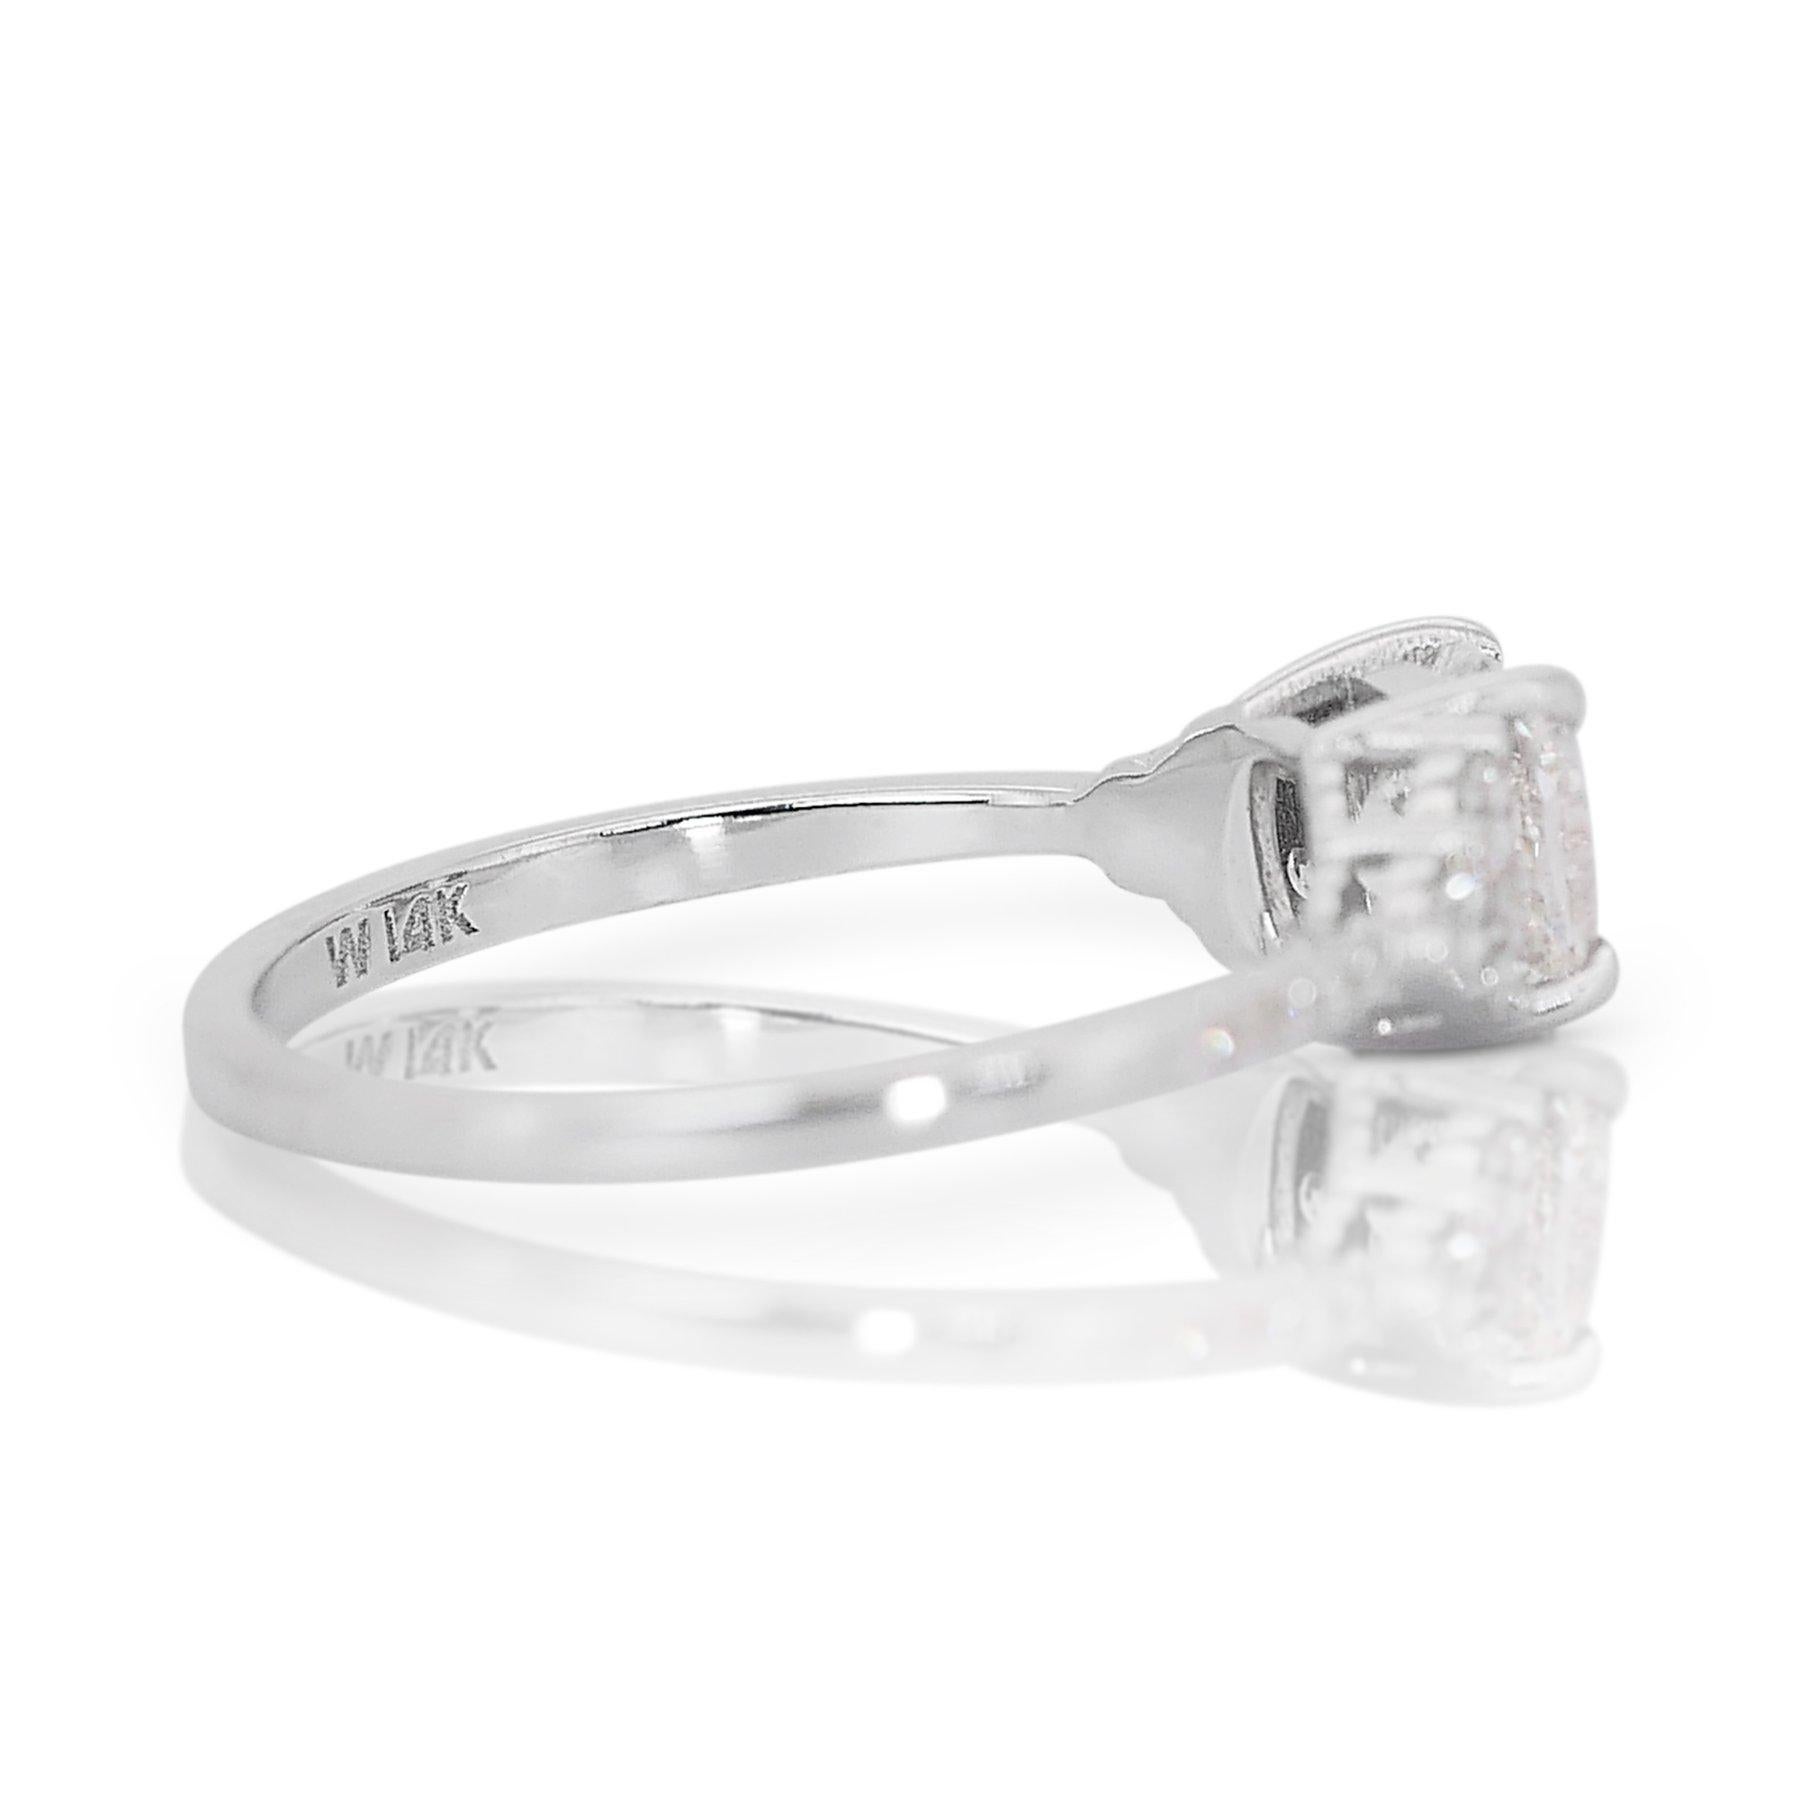 Magnificent 1.30ct Diamonds Pave Ring in 14k White Gold - GIA Certified In New Condition For Sale In רמת גן, IL